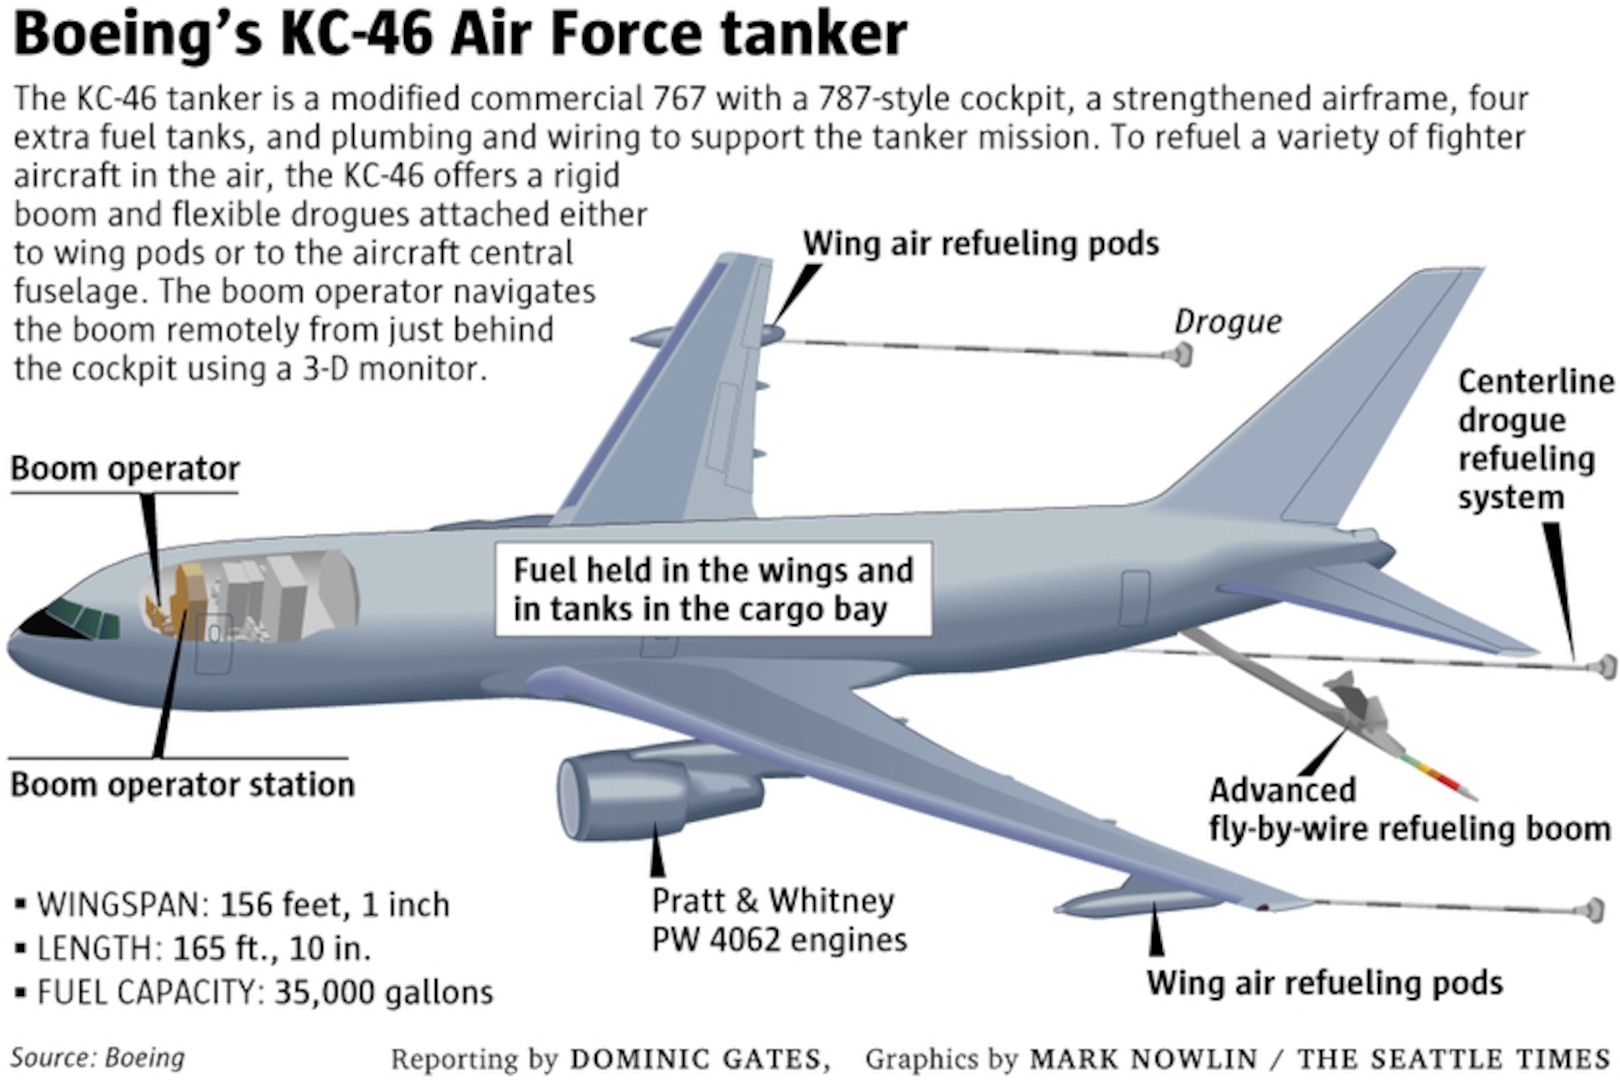 The KC-46 brings new capabilities to the Air Force’s tanker refueling fleet